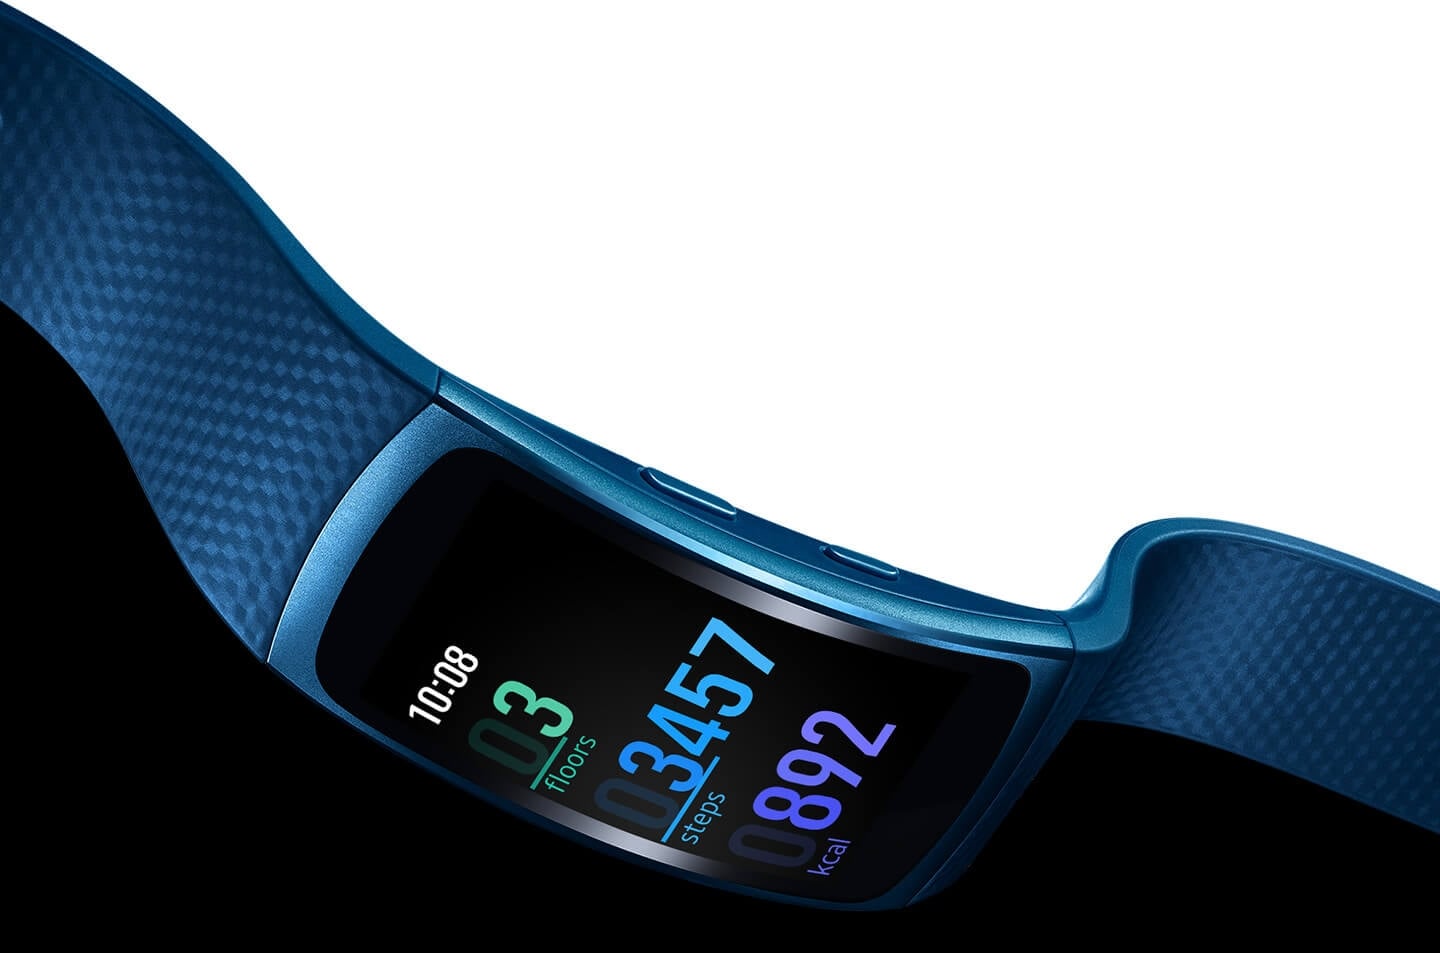 Gear fit2 in color blue with display tilted downwards showing how light and flexible its band is